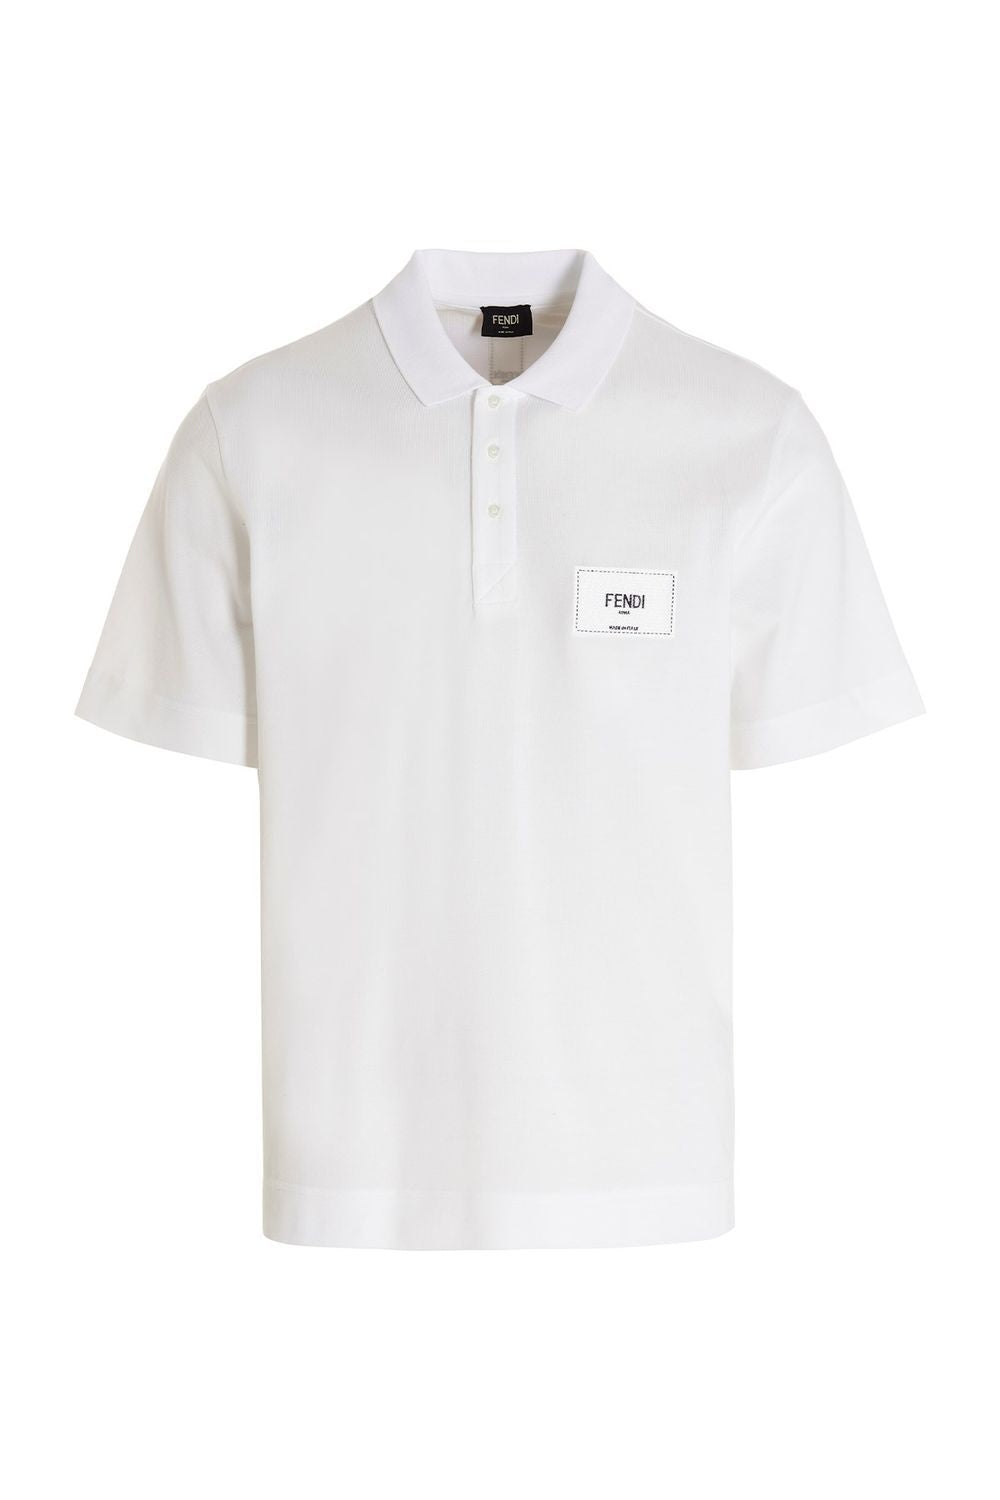 FENDI Men's Cotton Piqué Polo Shirt with Ribbed Collar and Side Slits